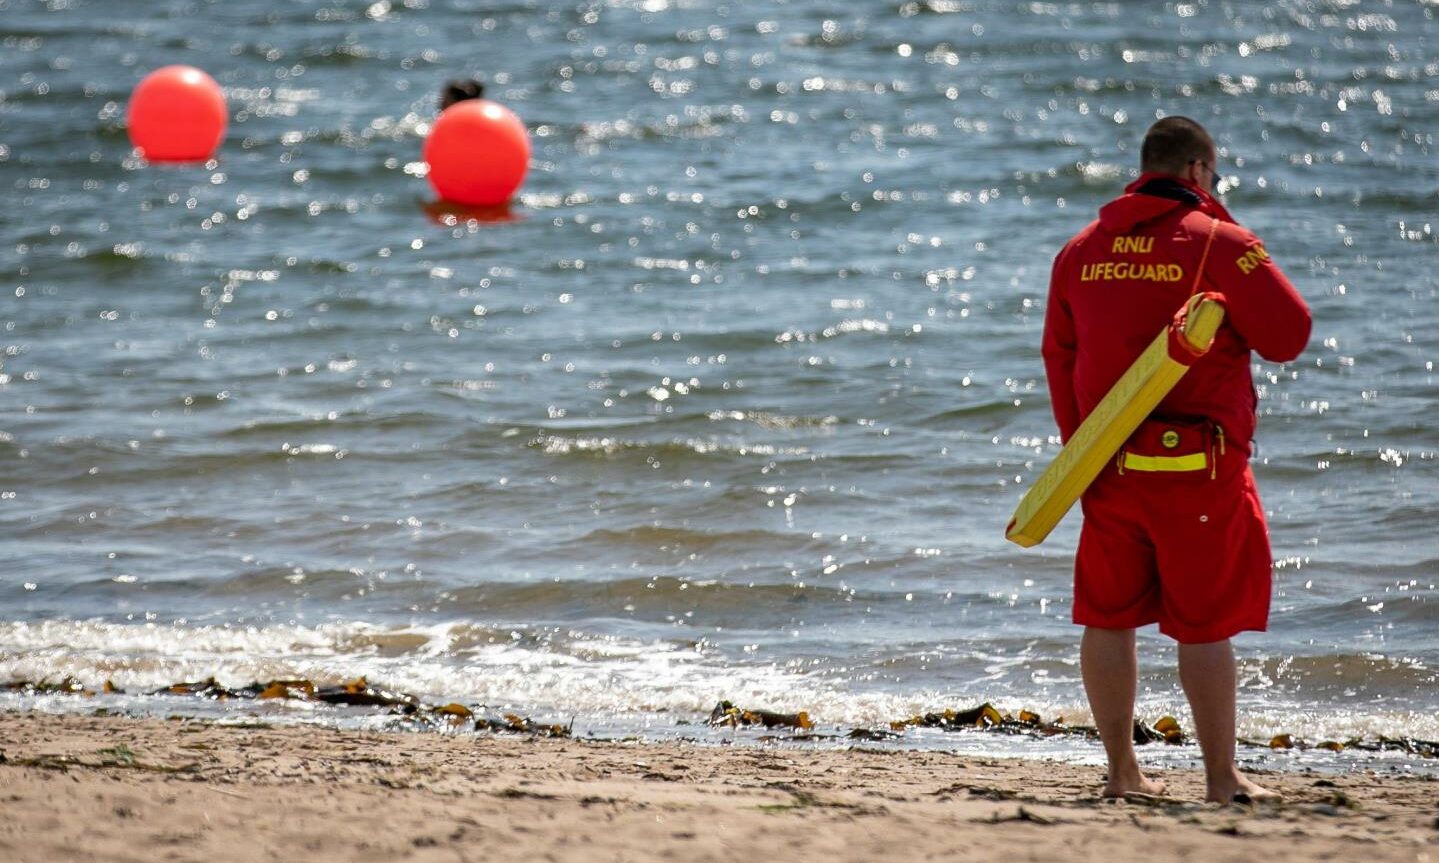 Scottish open water safety meeting held after spate of tragic incidents